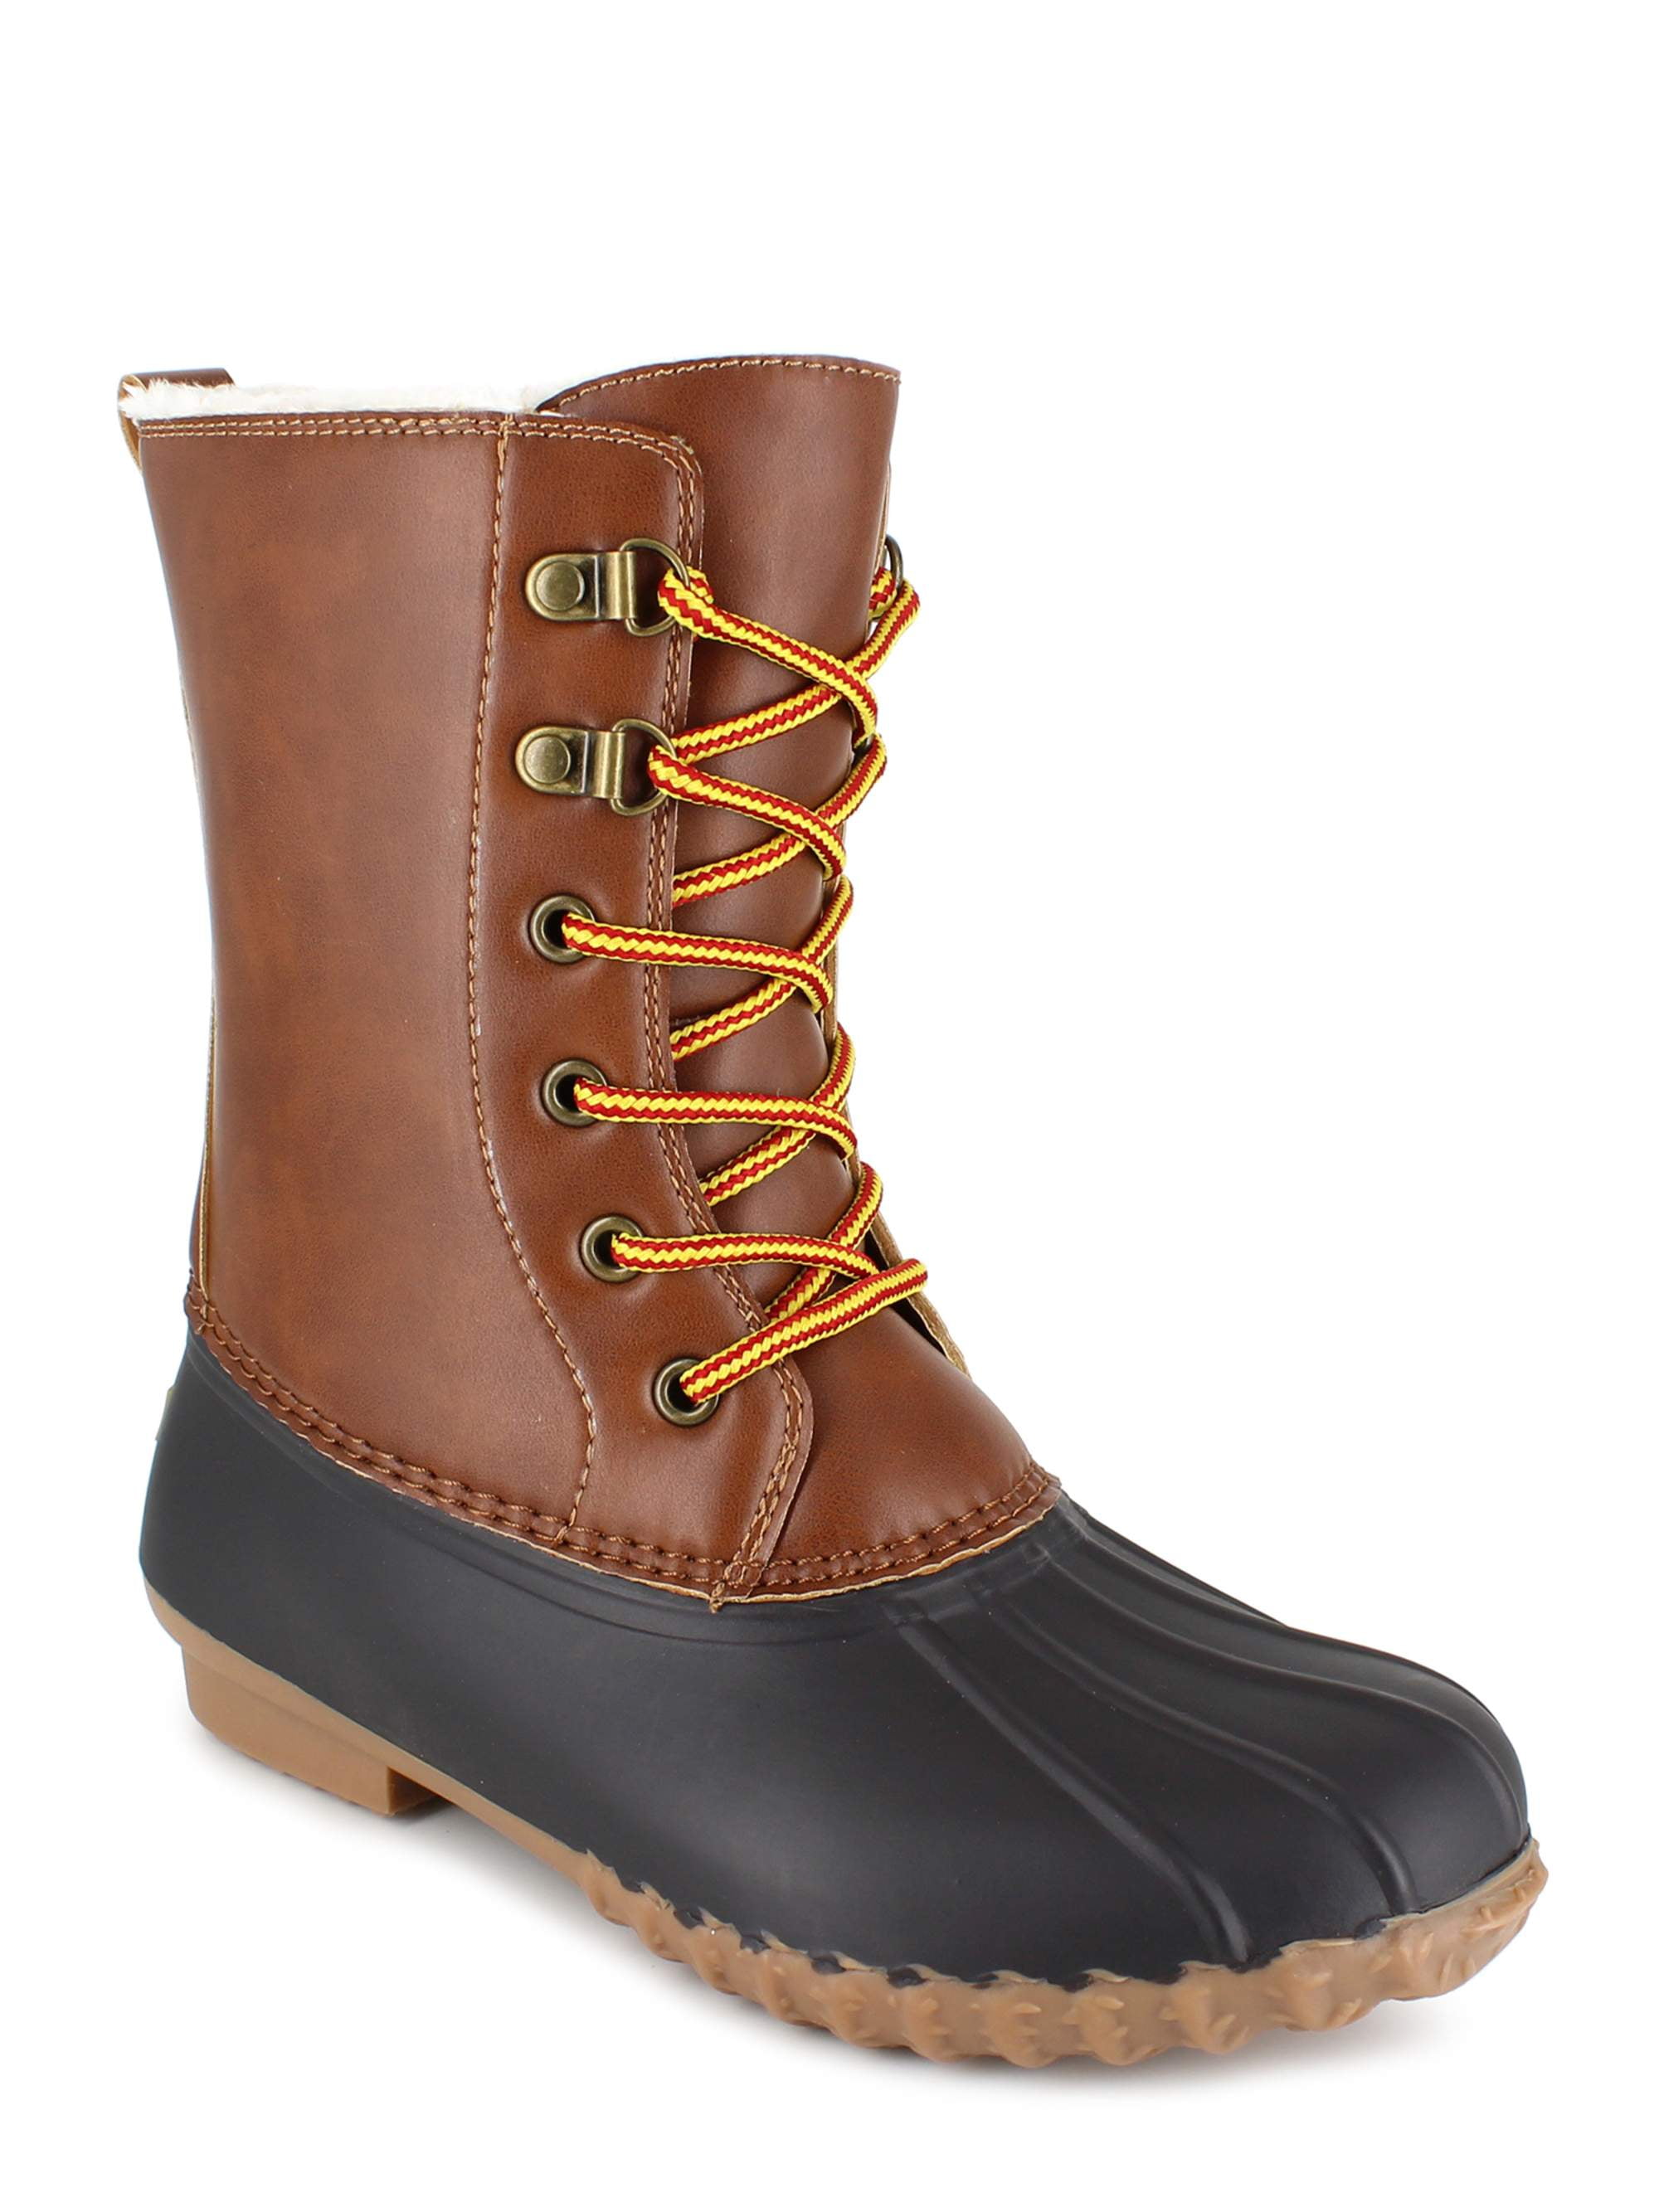 Buy > canyon creek duck boots > in stock